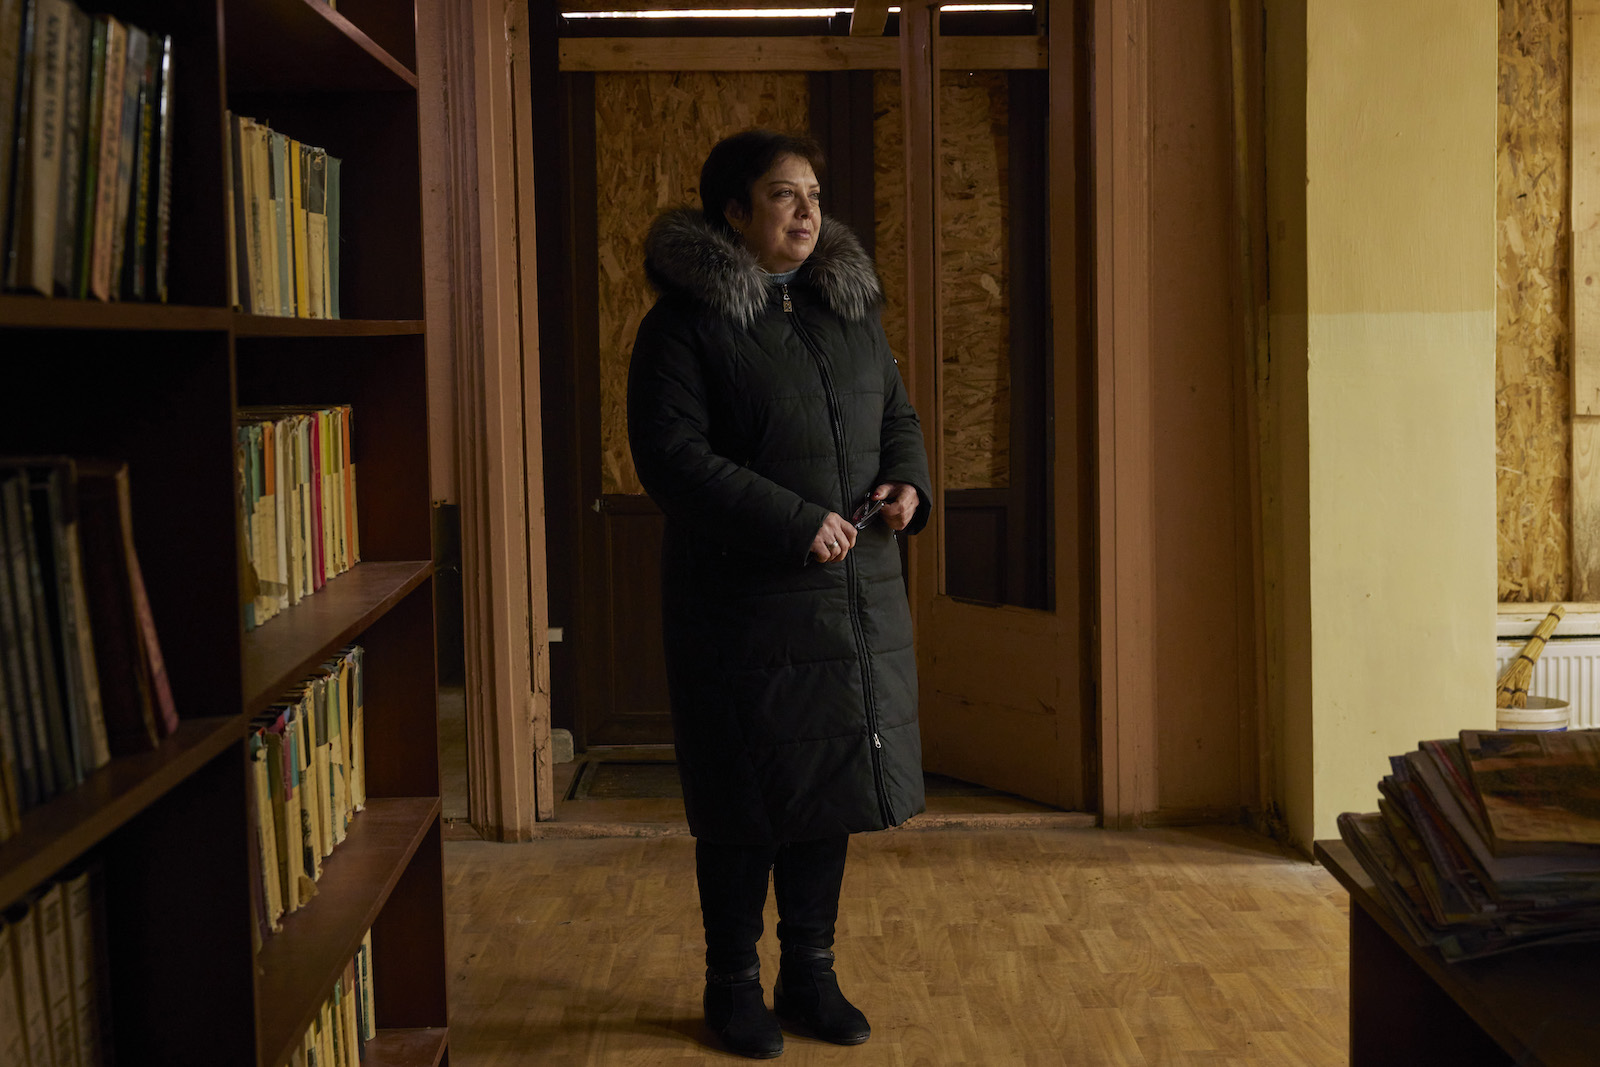 A middle-aged woman with short dark hair in a black coat with fur hood stands in a room with bookshelves and a door boarded up with plywood